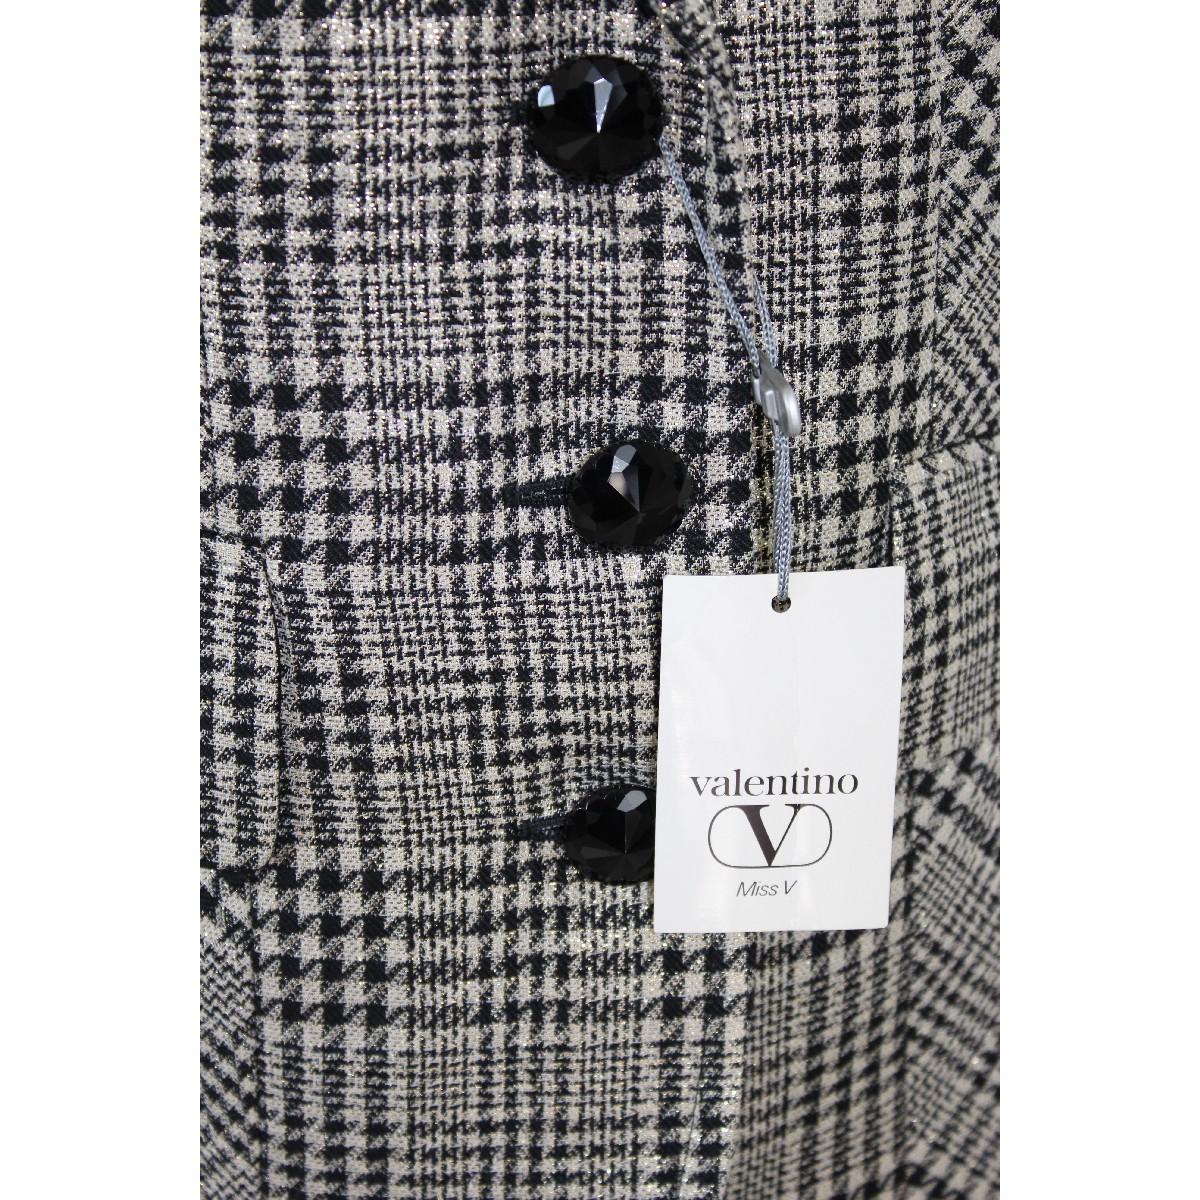 Women's Valentino Houndstooth Gray Wool Check Skirt Suit Dress 1990s NWT Size 10 Us